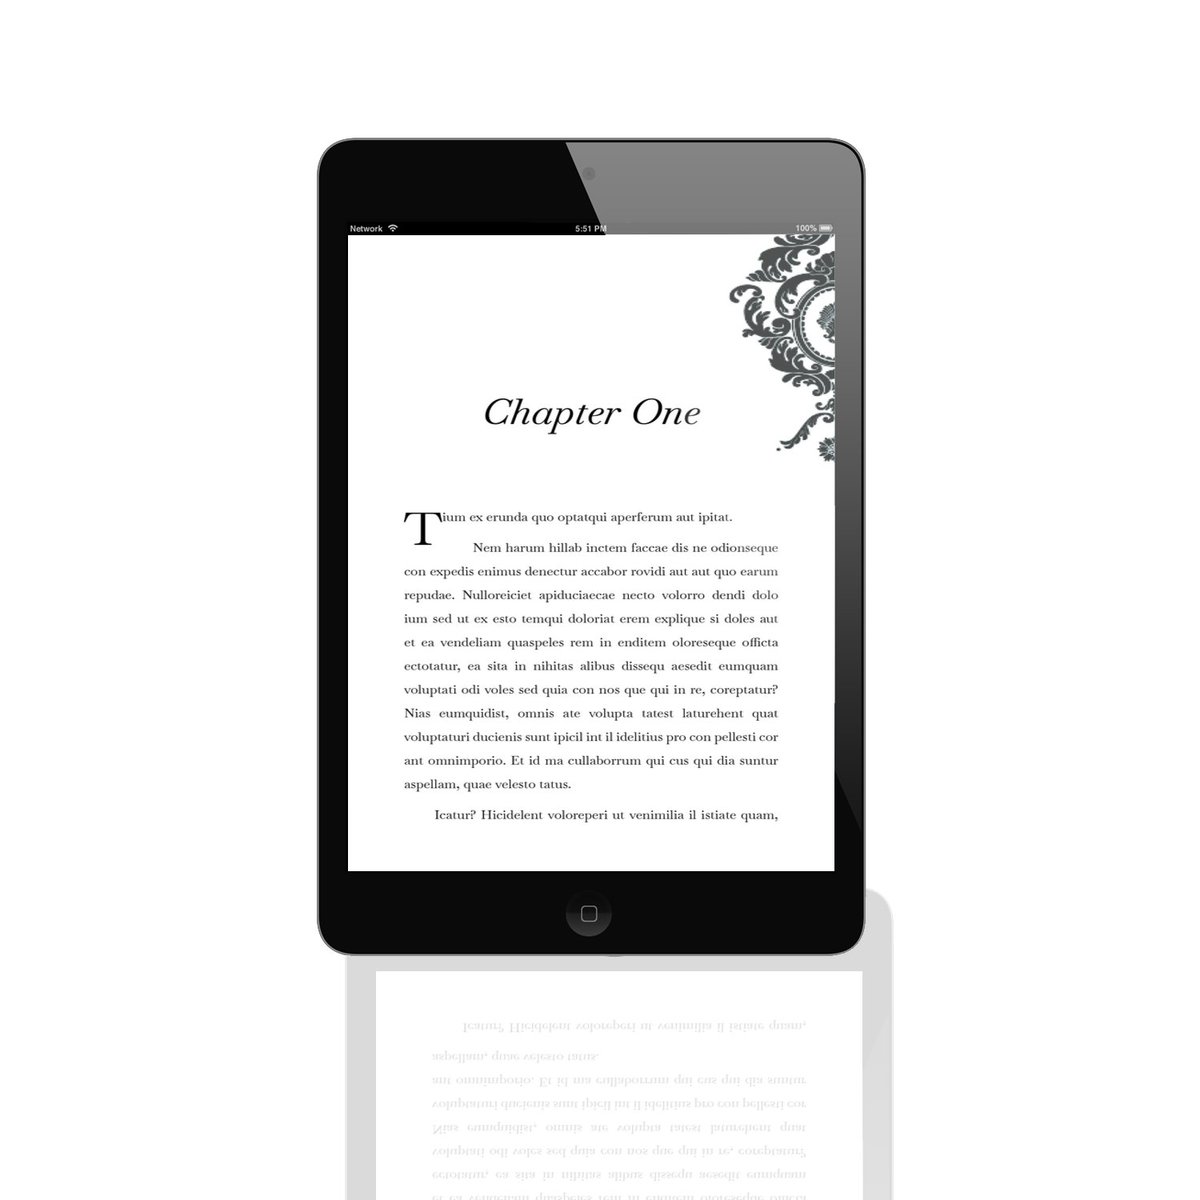 I will format your book for print and reflowable epub for Kindle.
__Check  my work__
nazmulgraphics66.blogspot.com

#formatting #typesting #layoutdesign #Booklayoutformatting #amazonebookformatting #amazonbokformatting #layoutdesign #bookformatting #author #authorsofinstagram